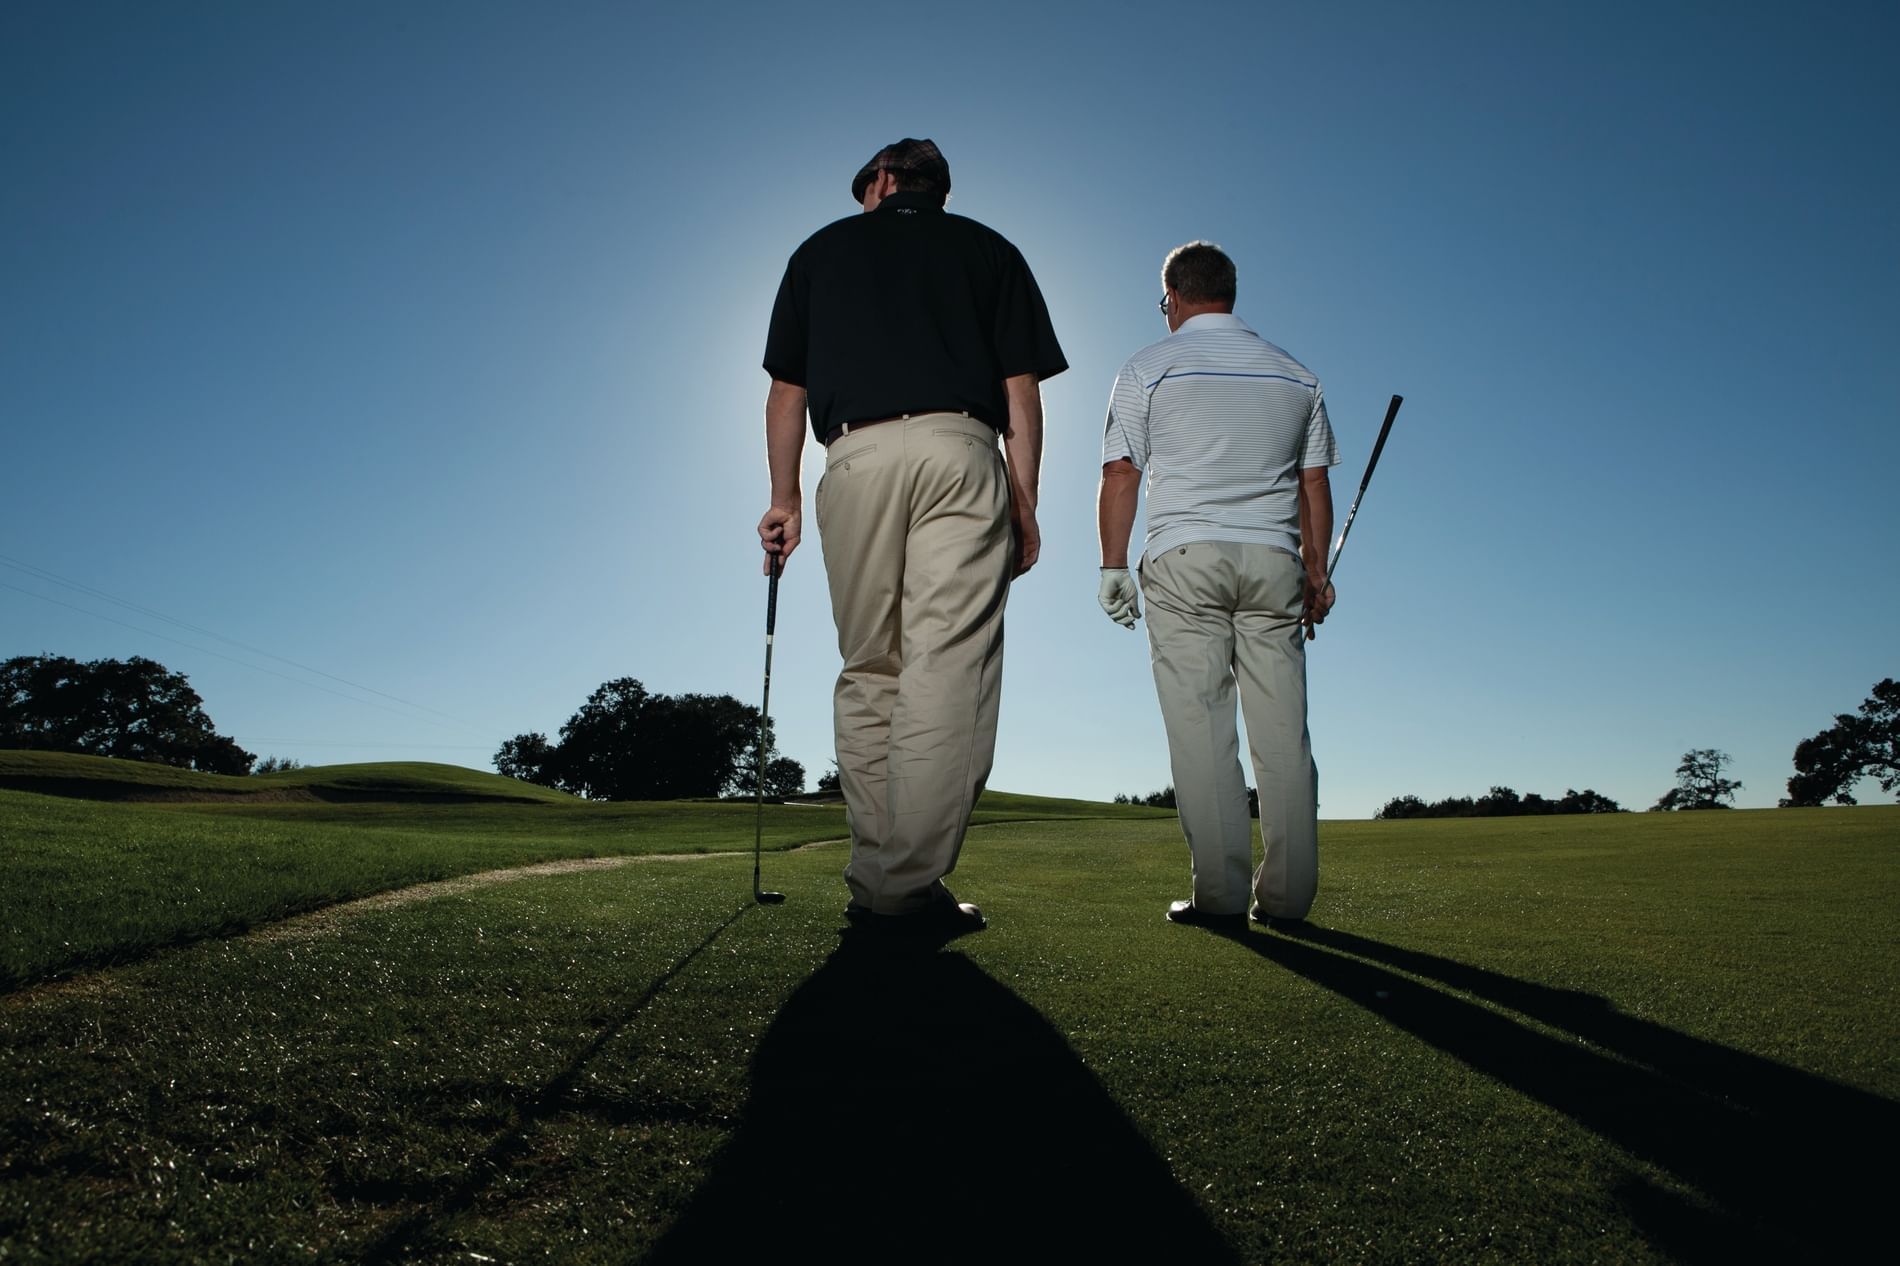 Two men standing on the fairway playing golf.  Blue sky and sunn